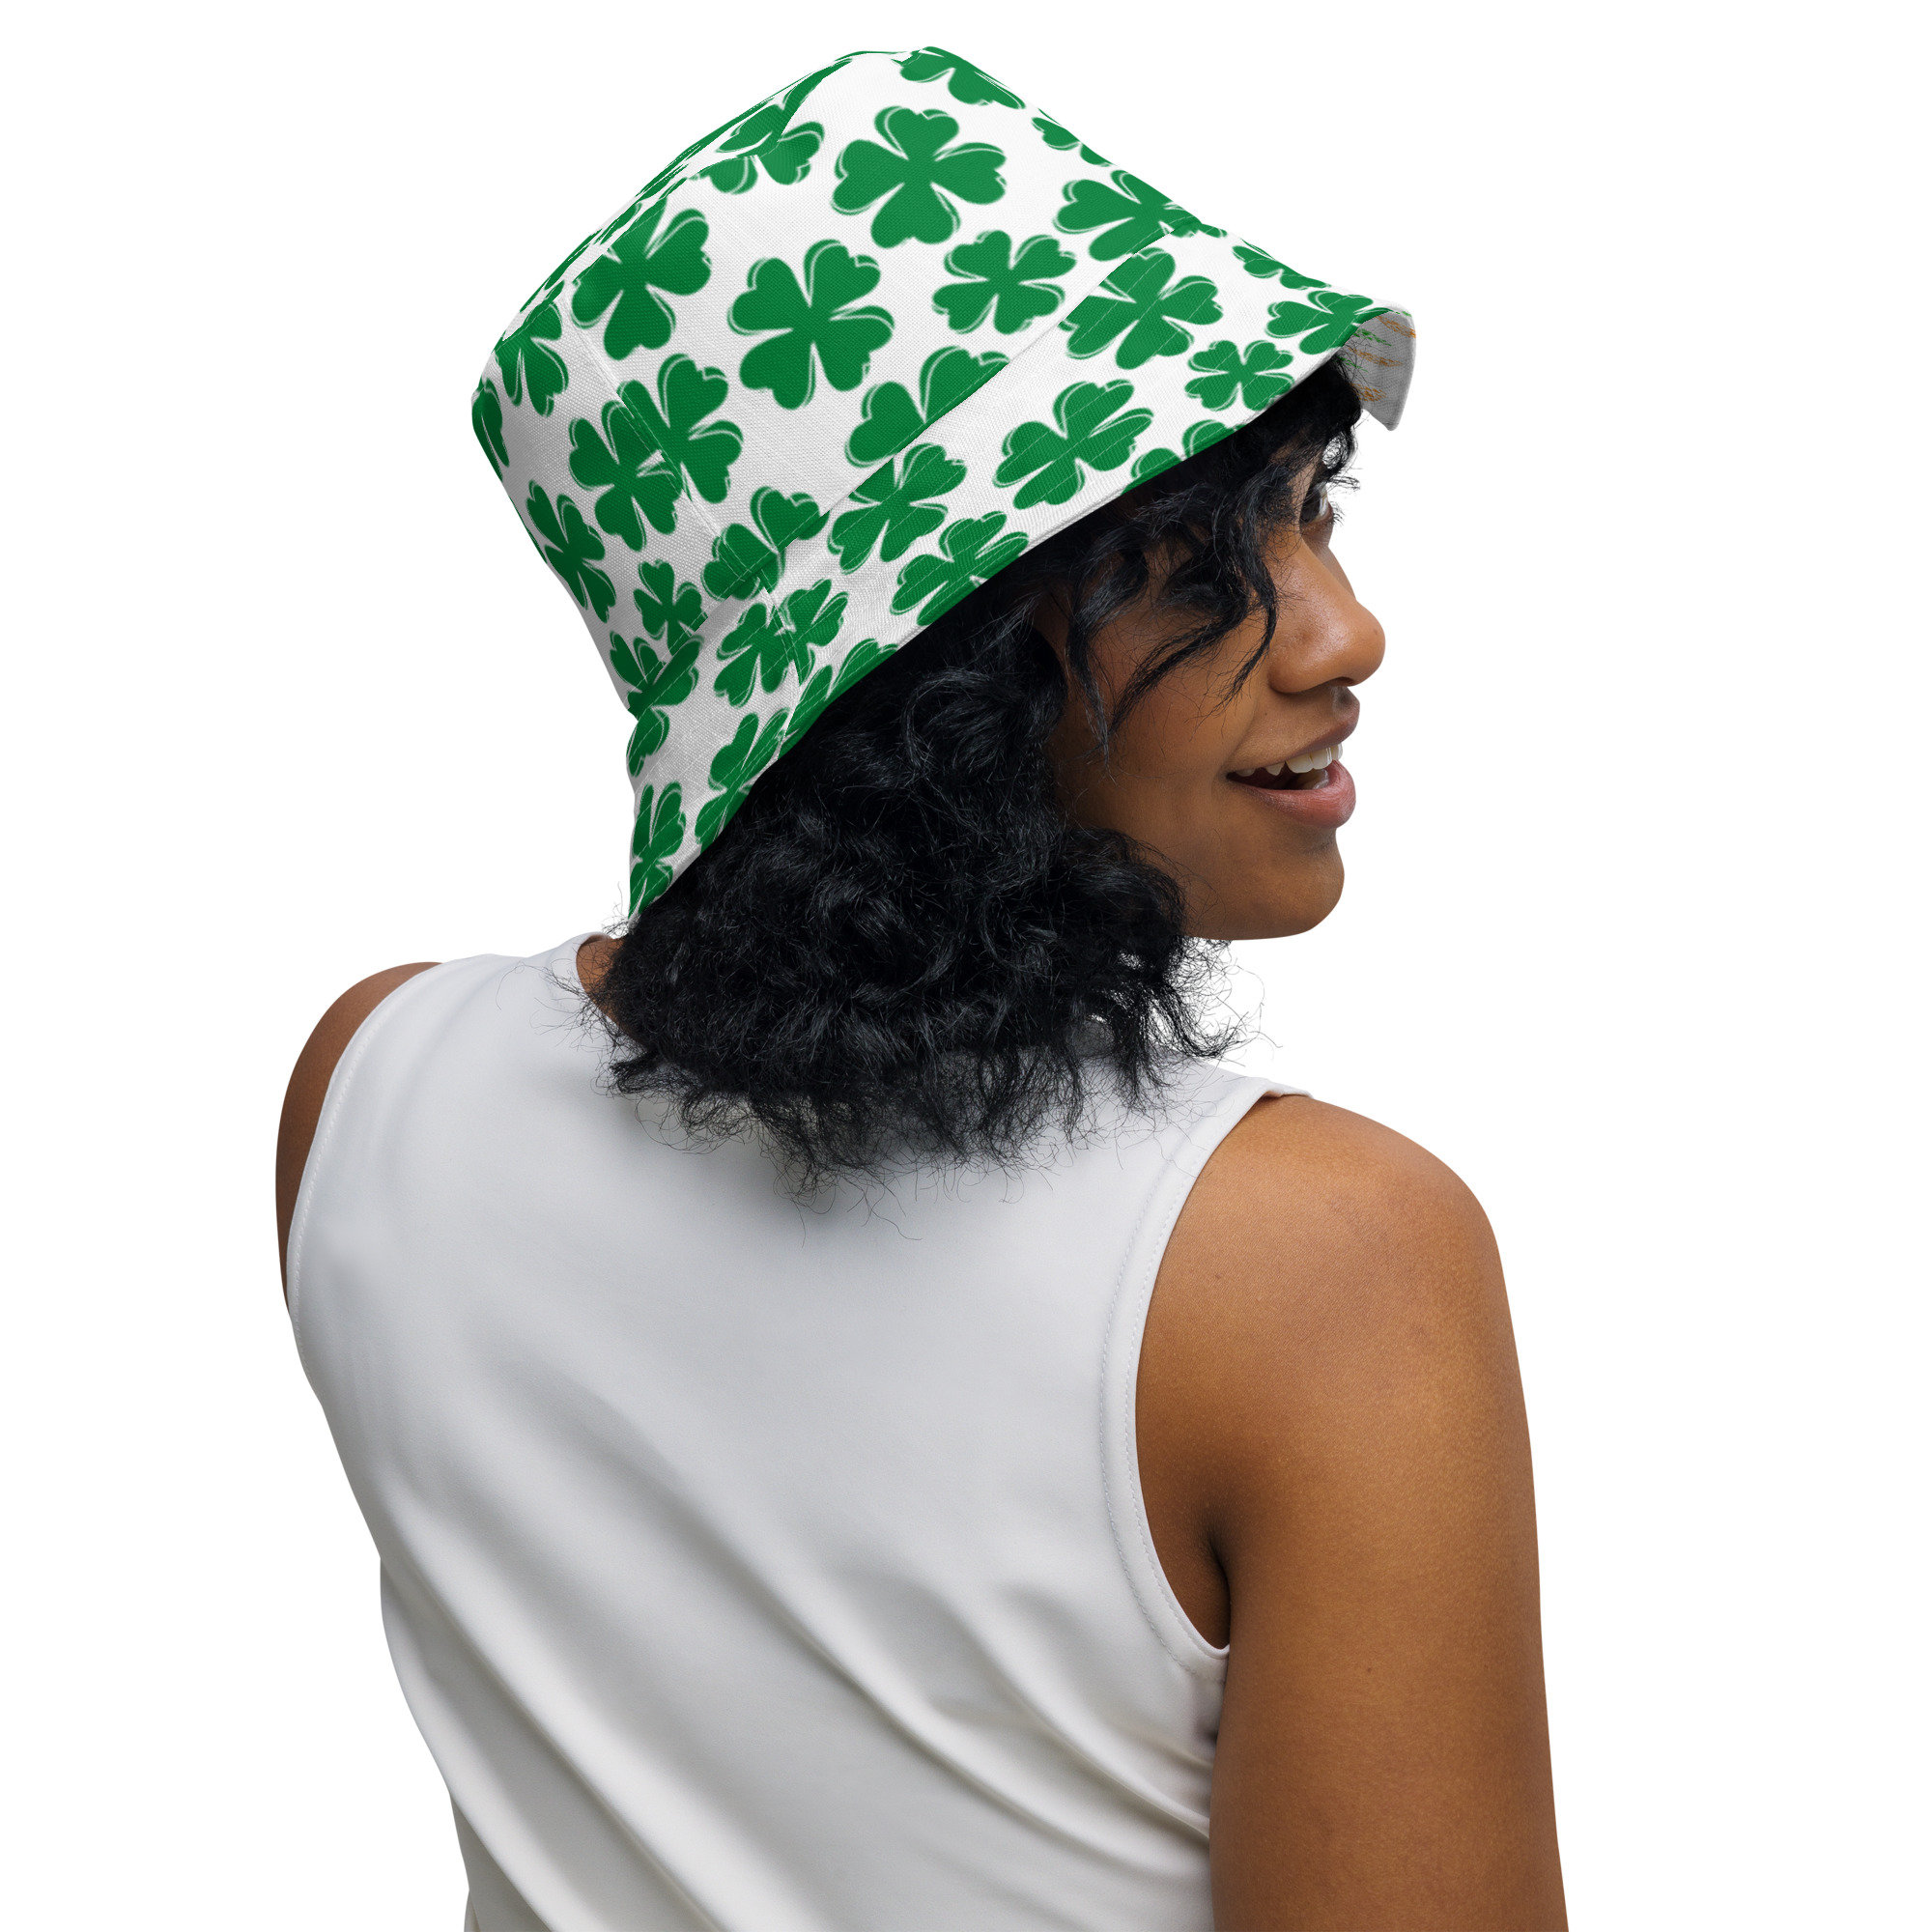 Green faux fur bucket hat. Festival fuzzy hat. Shaggy hat for St. Patrick's  Day.